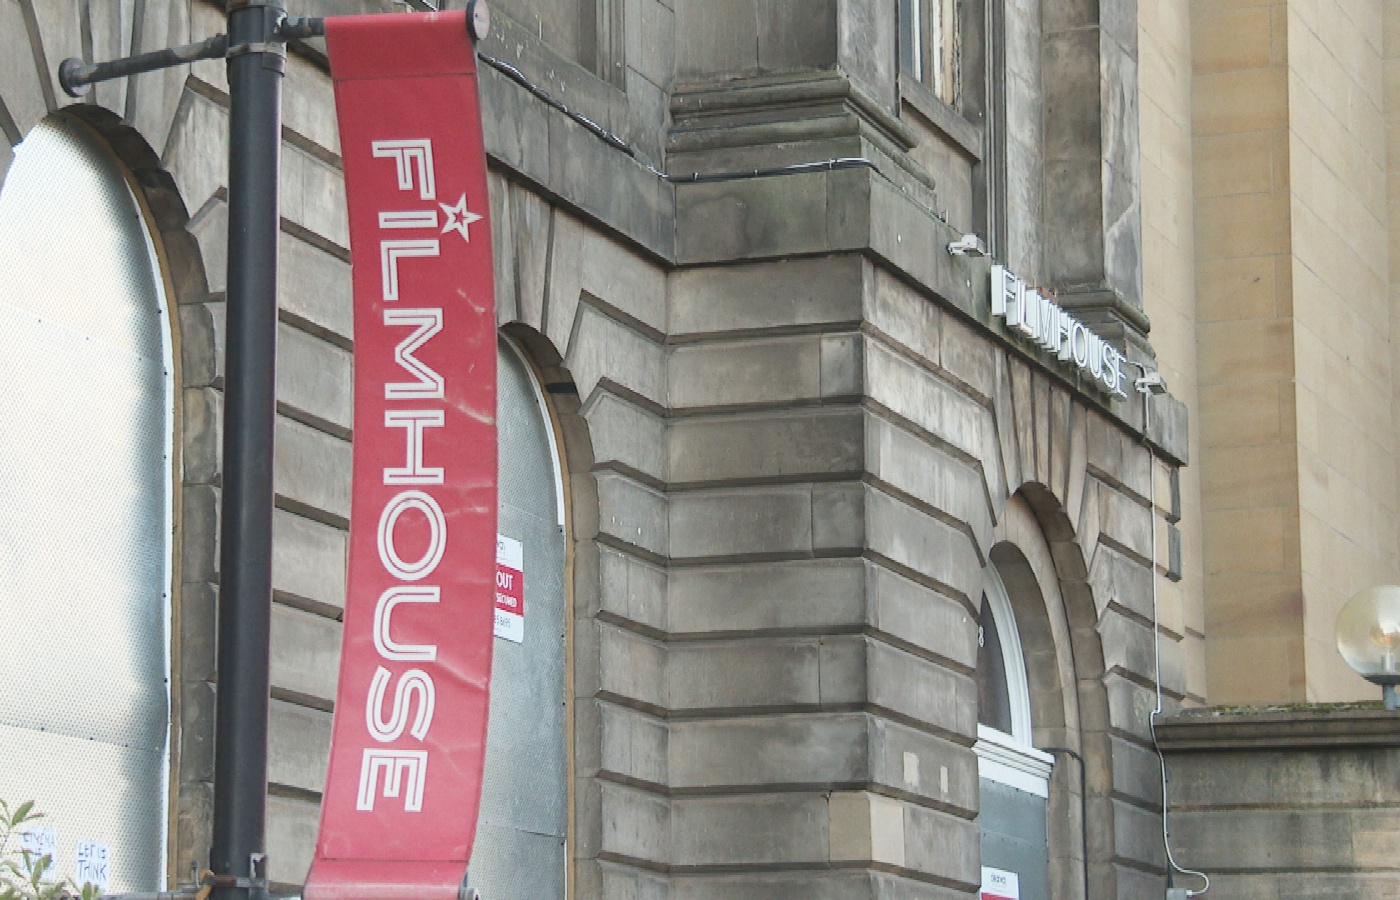 The iconic Filmhouse closed its doors in October.